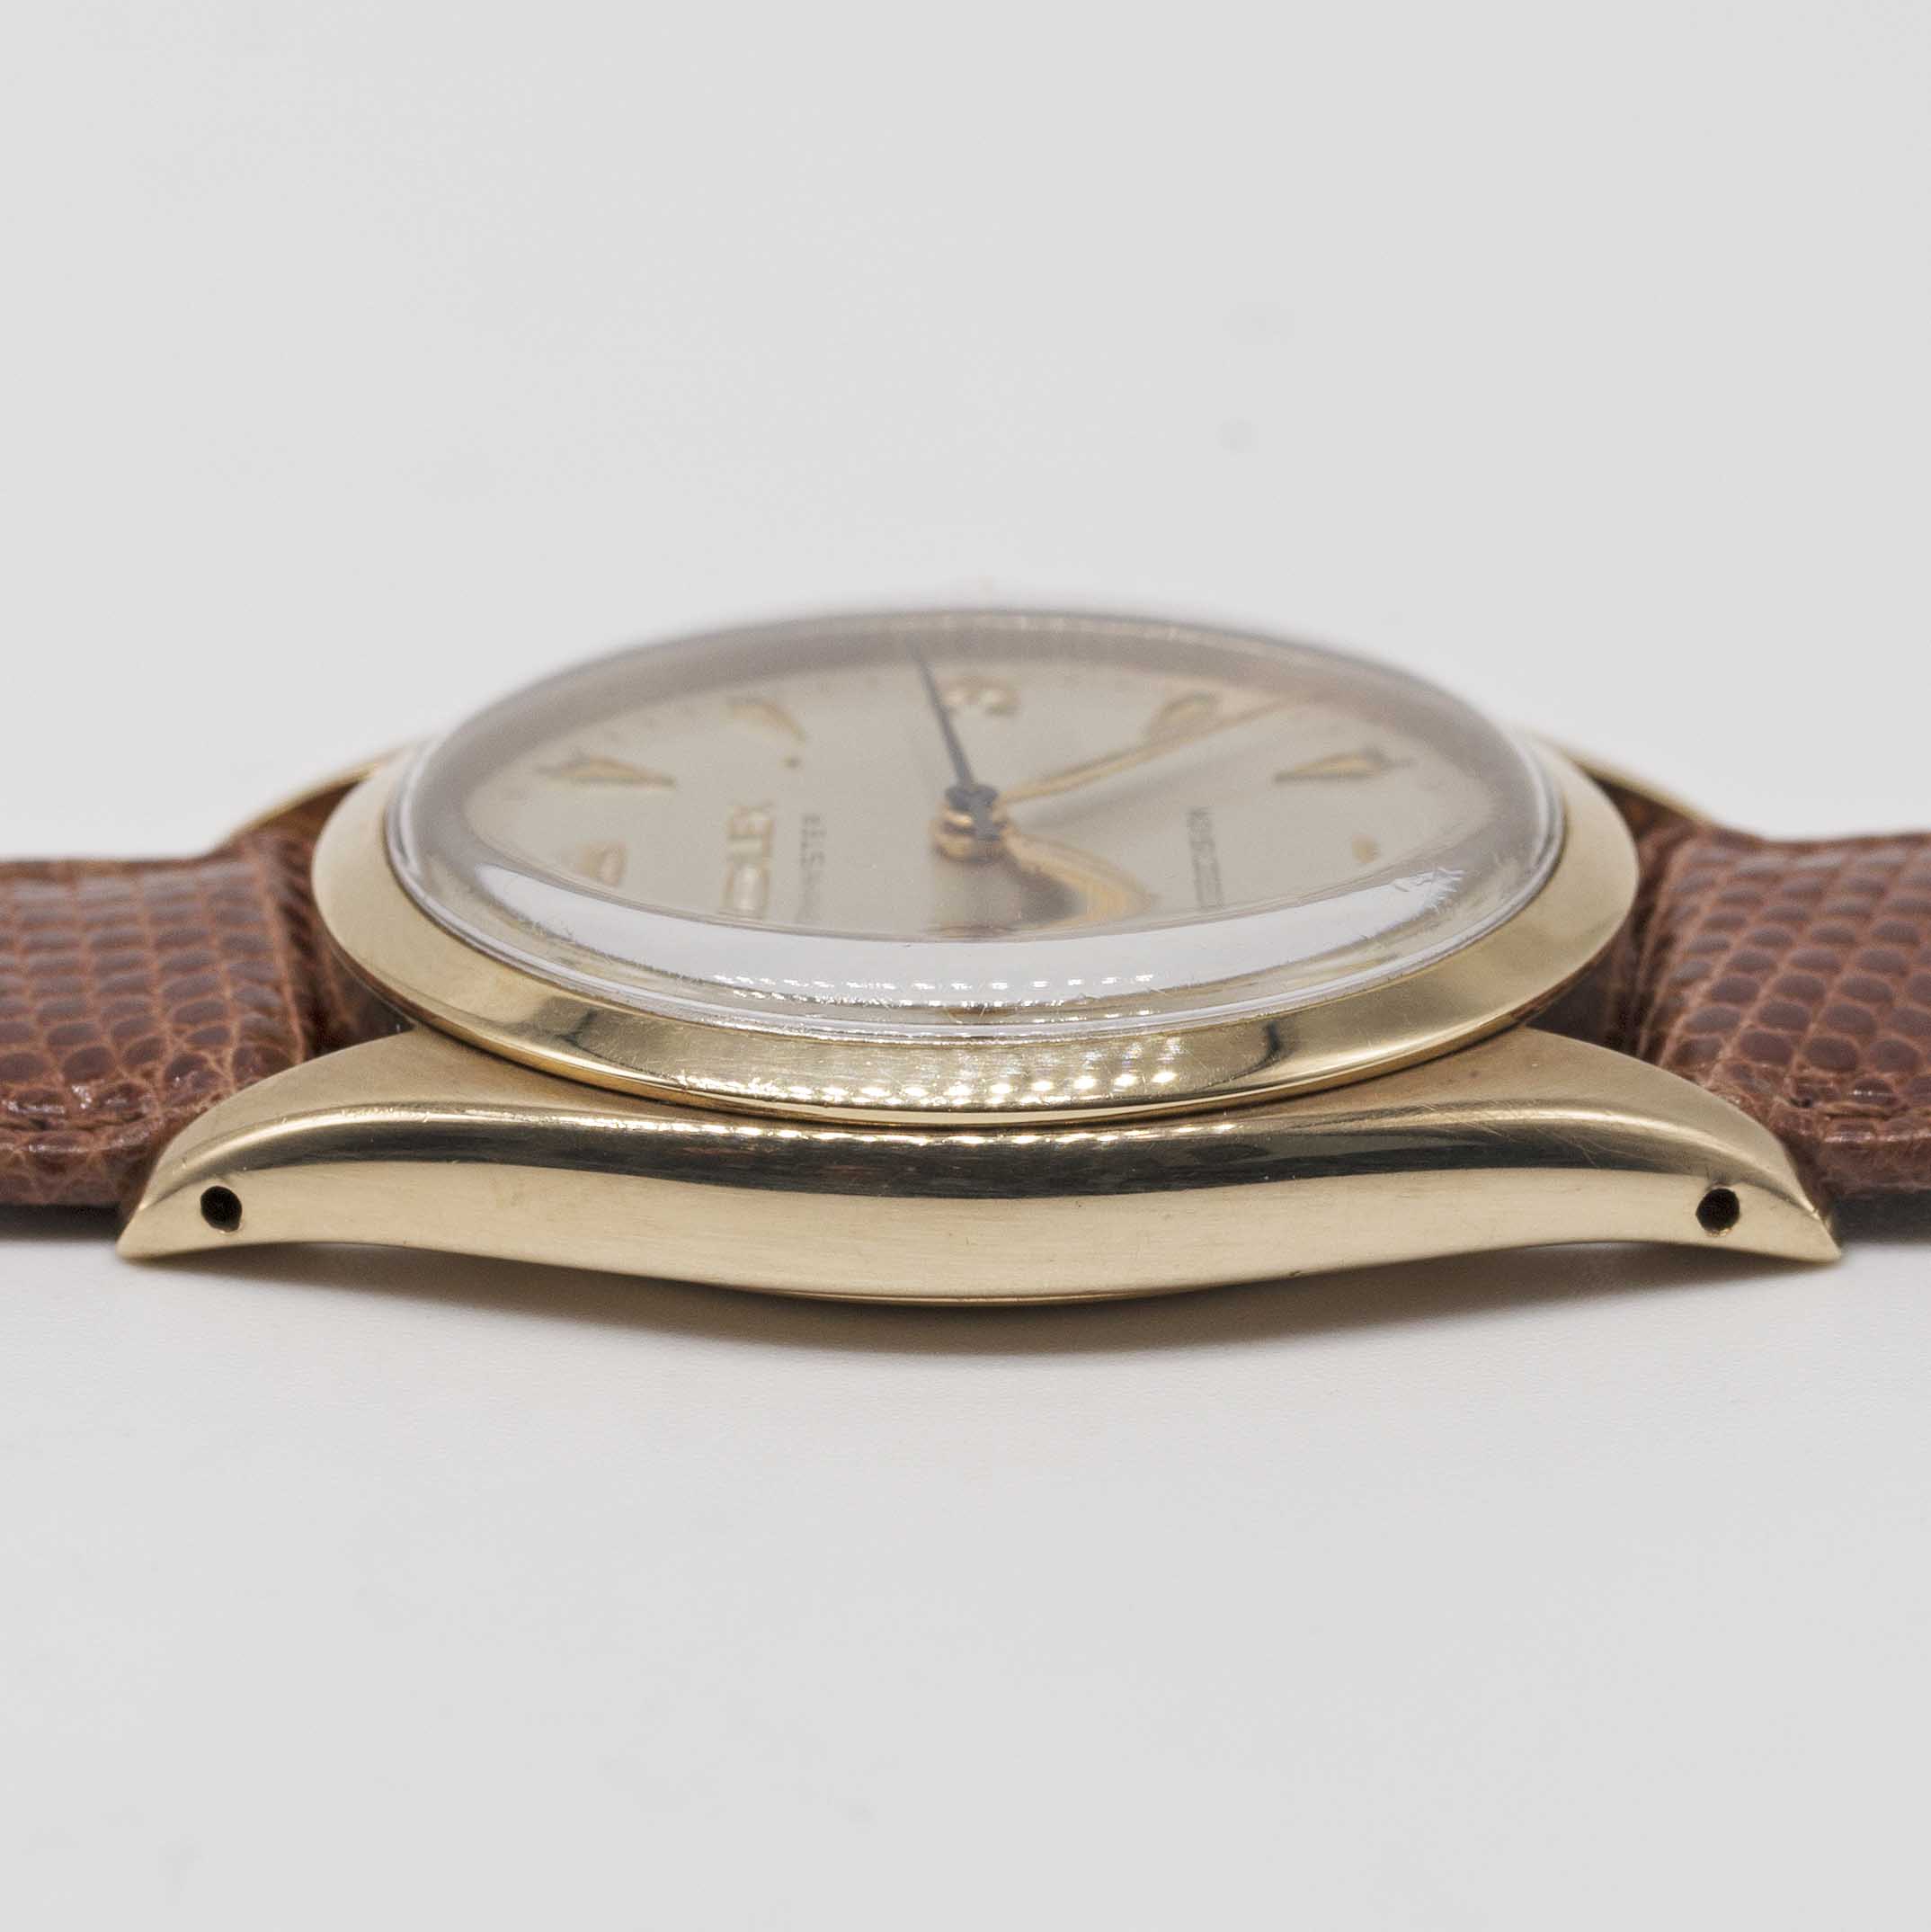 A GENTLEMAN'S 9CT SOLID GOLD ROLEX OYSTER PRECISION WRIST WATCH CIRCA 1959, REF. 6426 WITH 3-6-9 " - Image 8 of 8